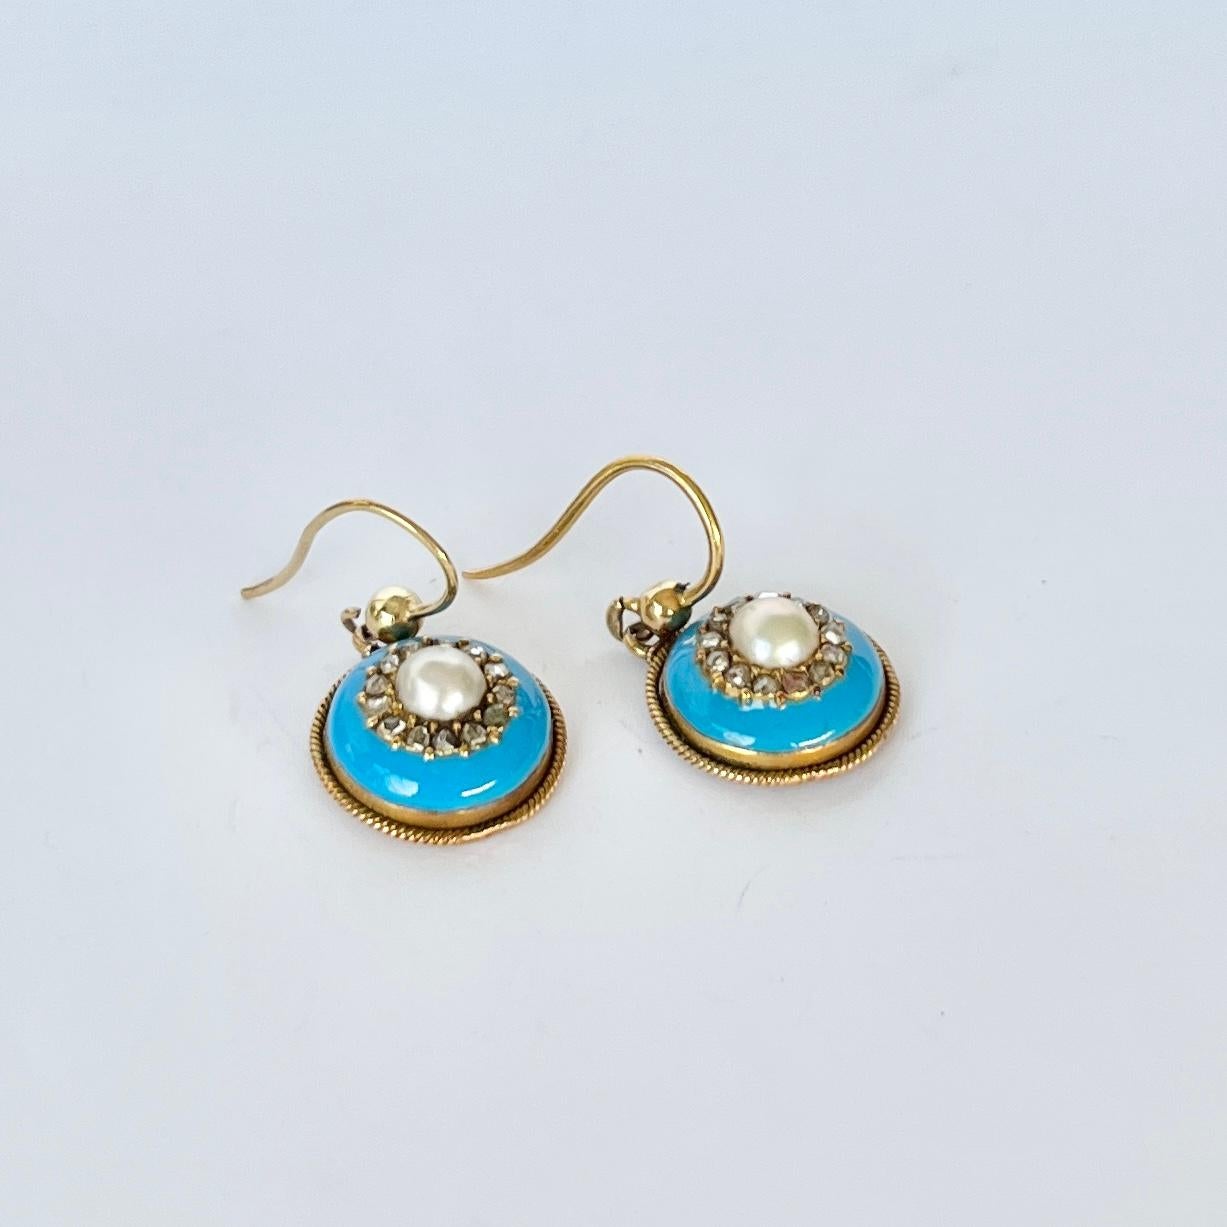 Antique Enamel, Pearl and Rose Cut Diamond Earrings In Good Condition For Sale In Chipping Campden, GB